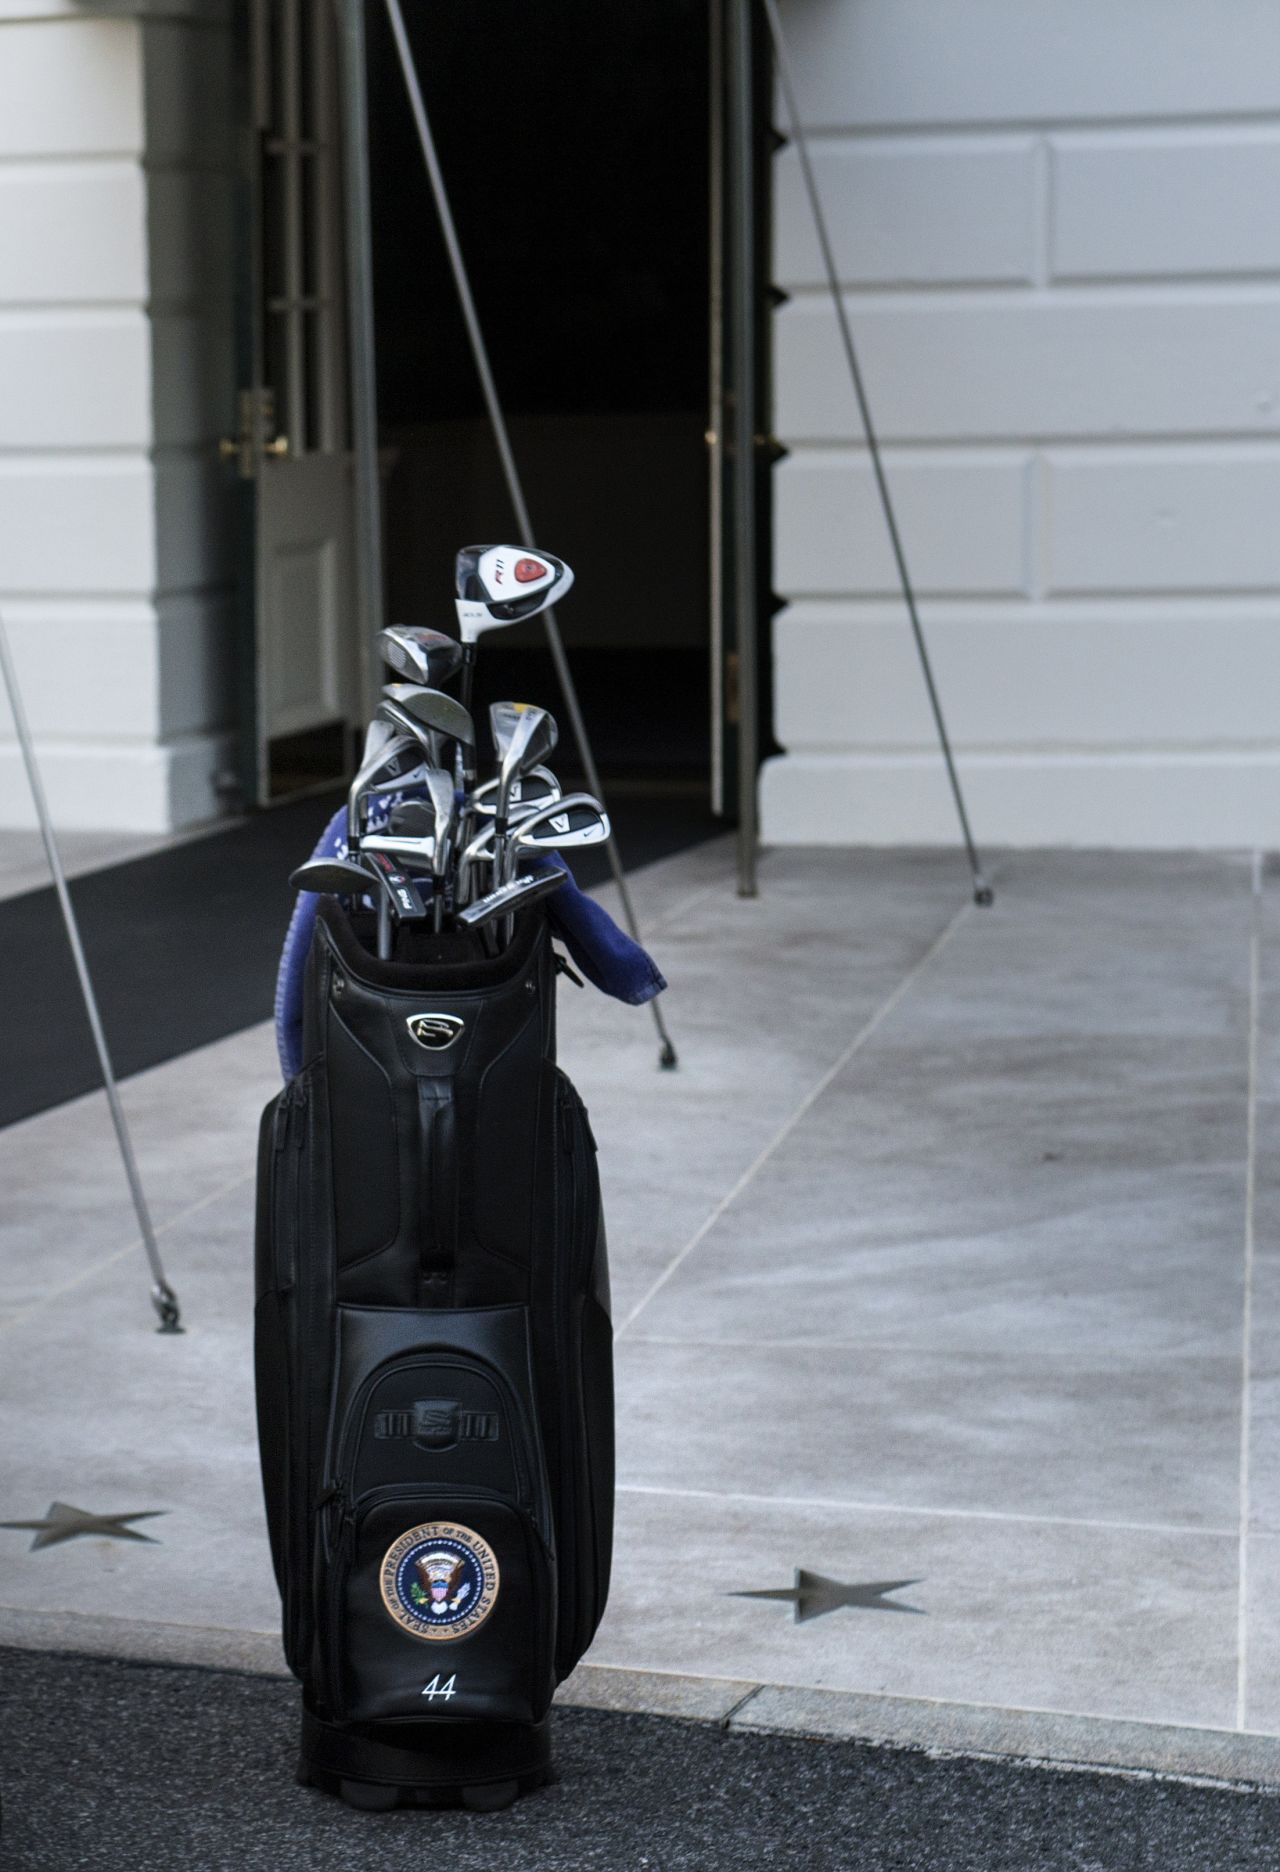 Obama spent the weekend after his re-election in 2012 playing golf at Andrews Air Force Base in Washington. His clubs are seen here in front of the entrance to south portico of the White House, with the number 44 stitched into the bag representing his place in the line of U.S. presidents.